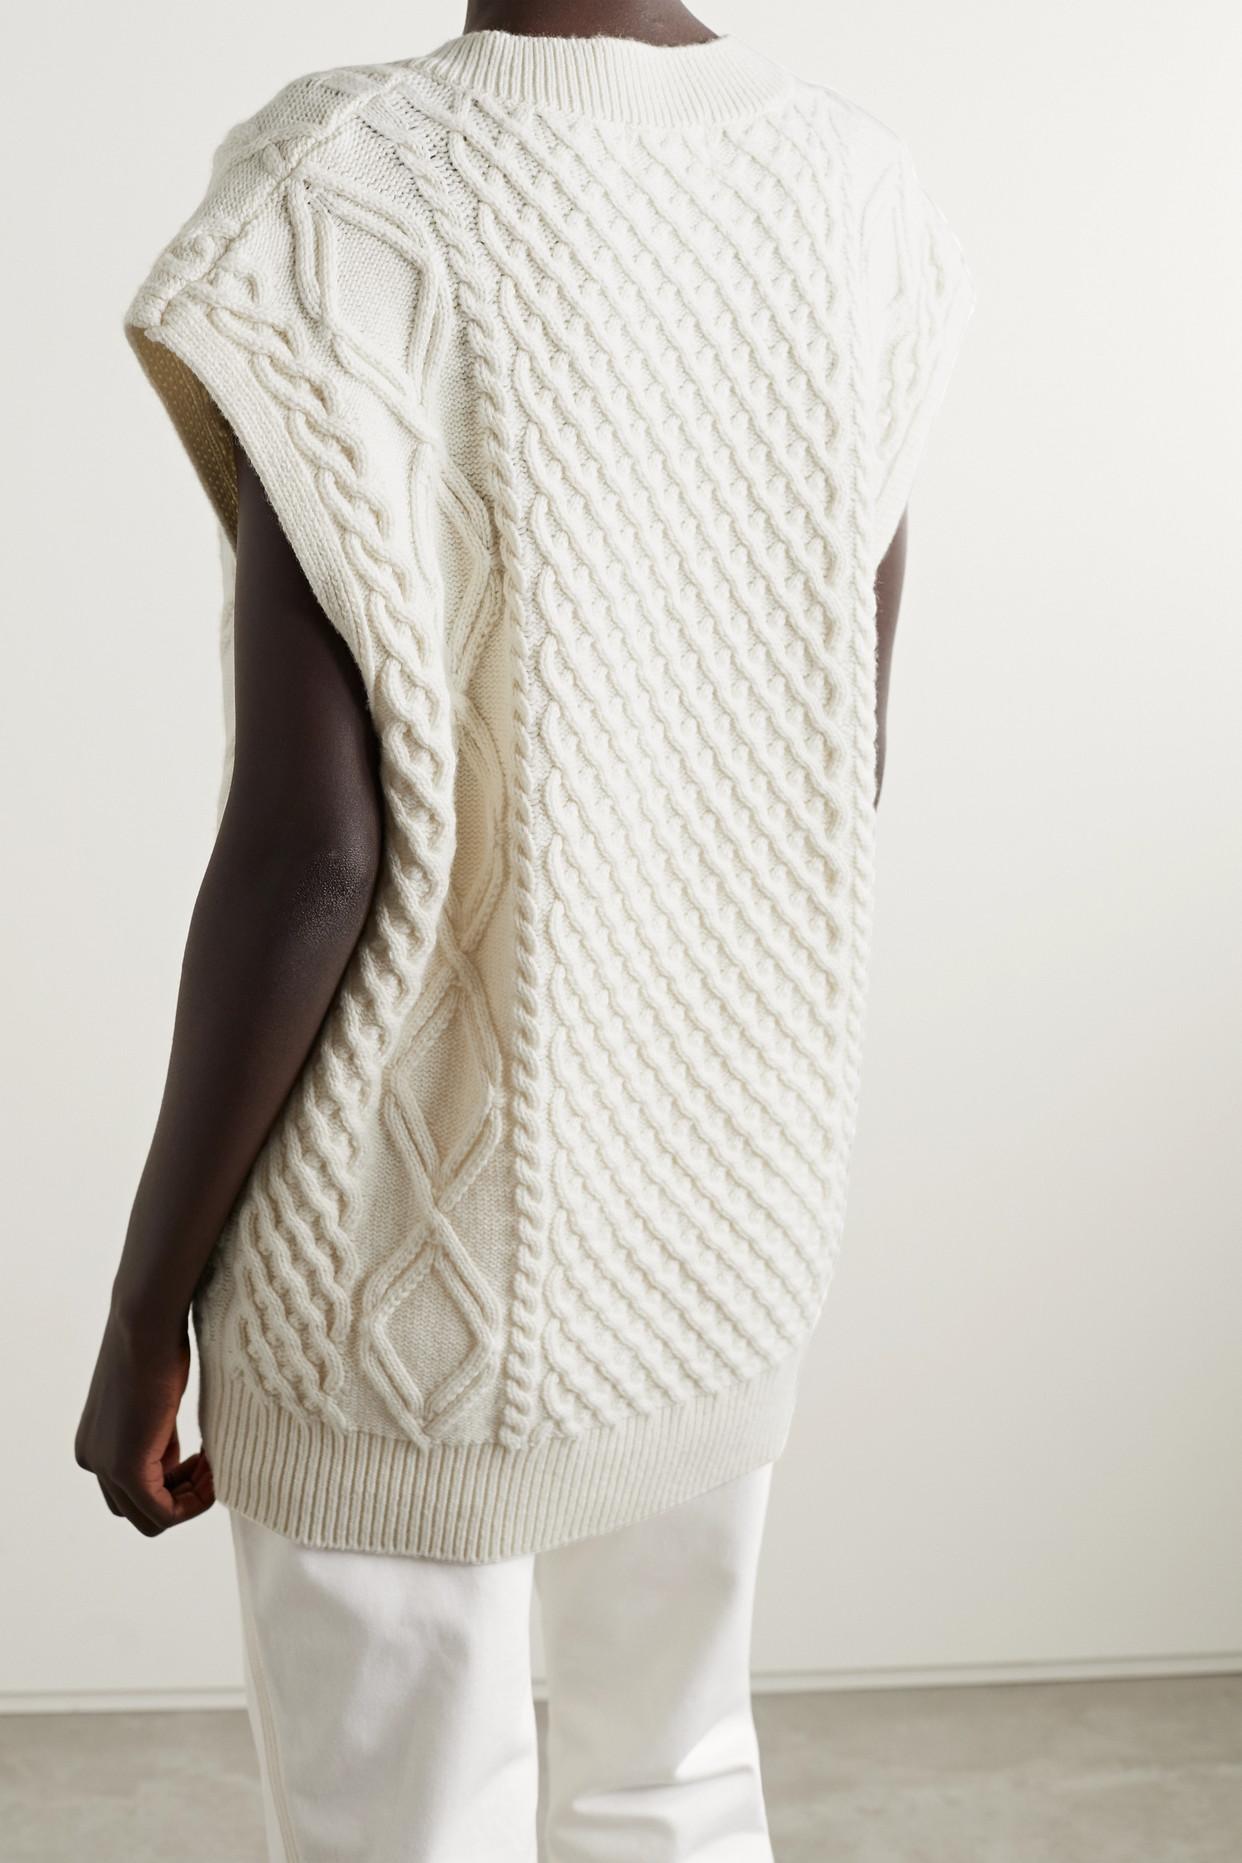 Frankie Shop Oversized Cable-knit Wool Tank in Natural | Lyst UK